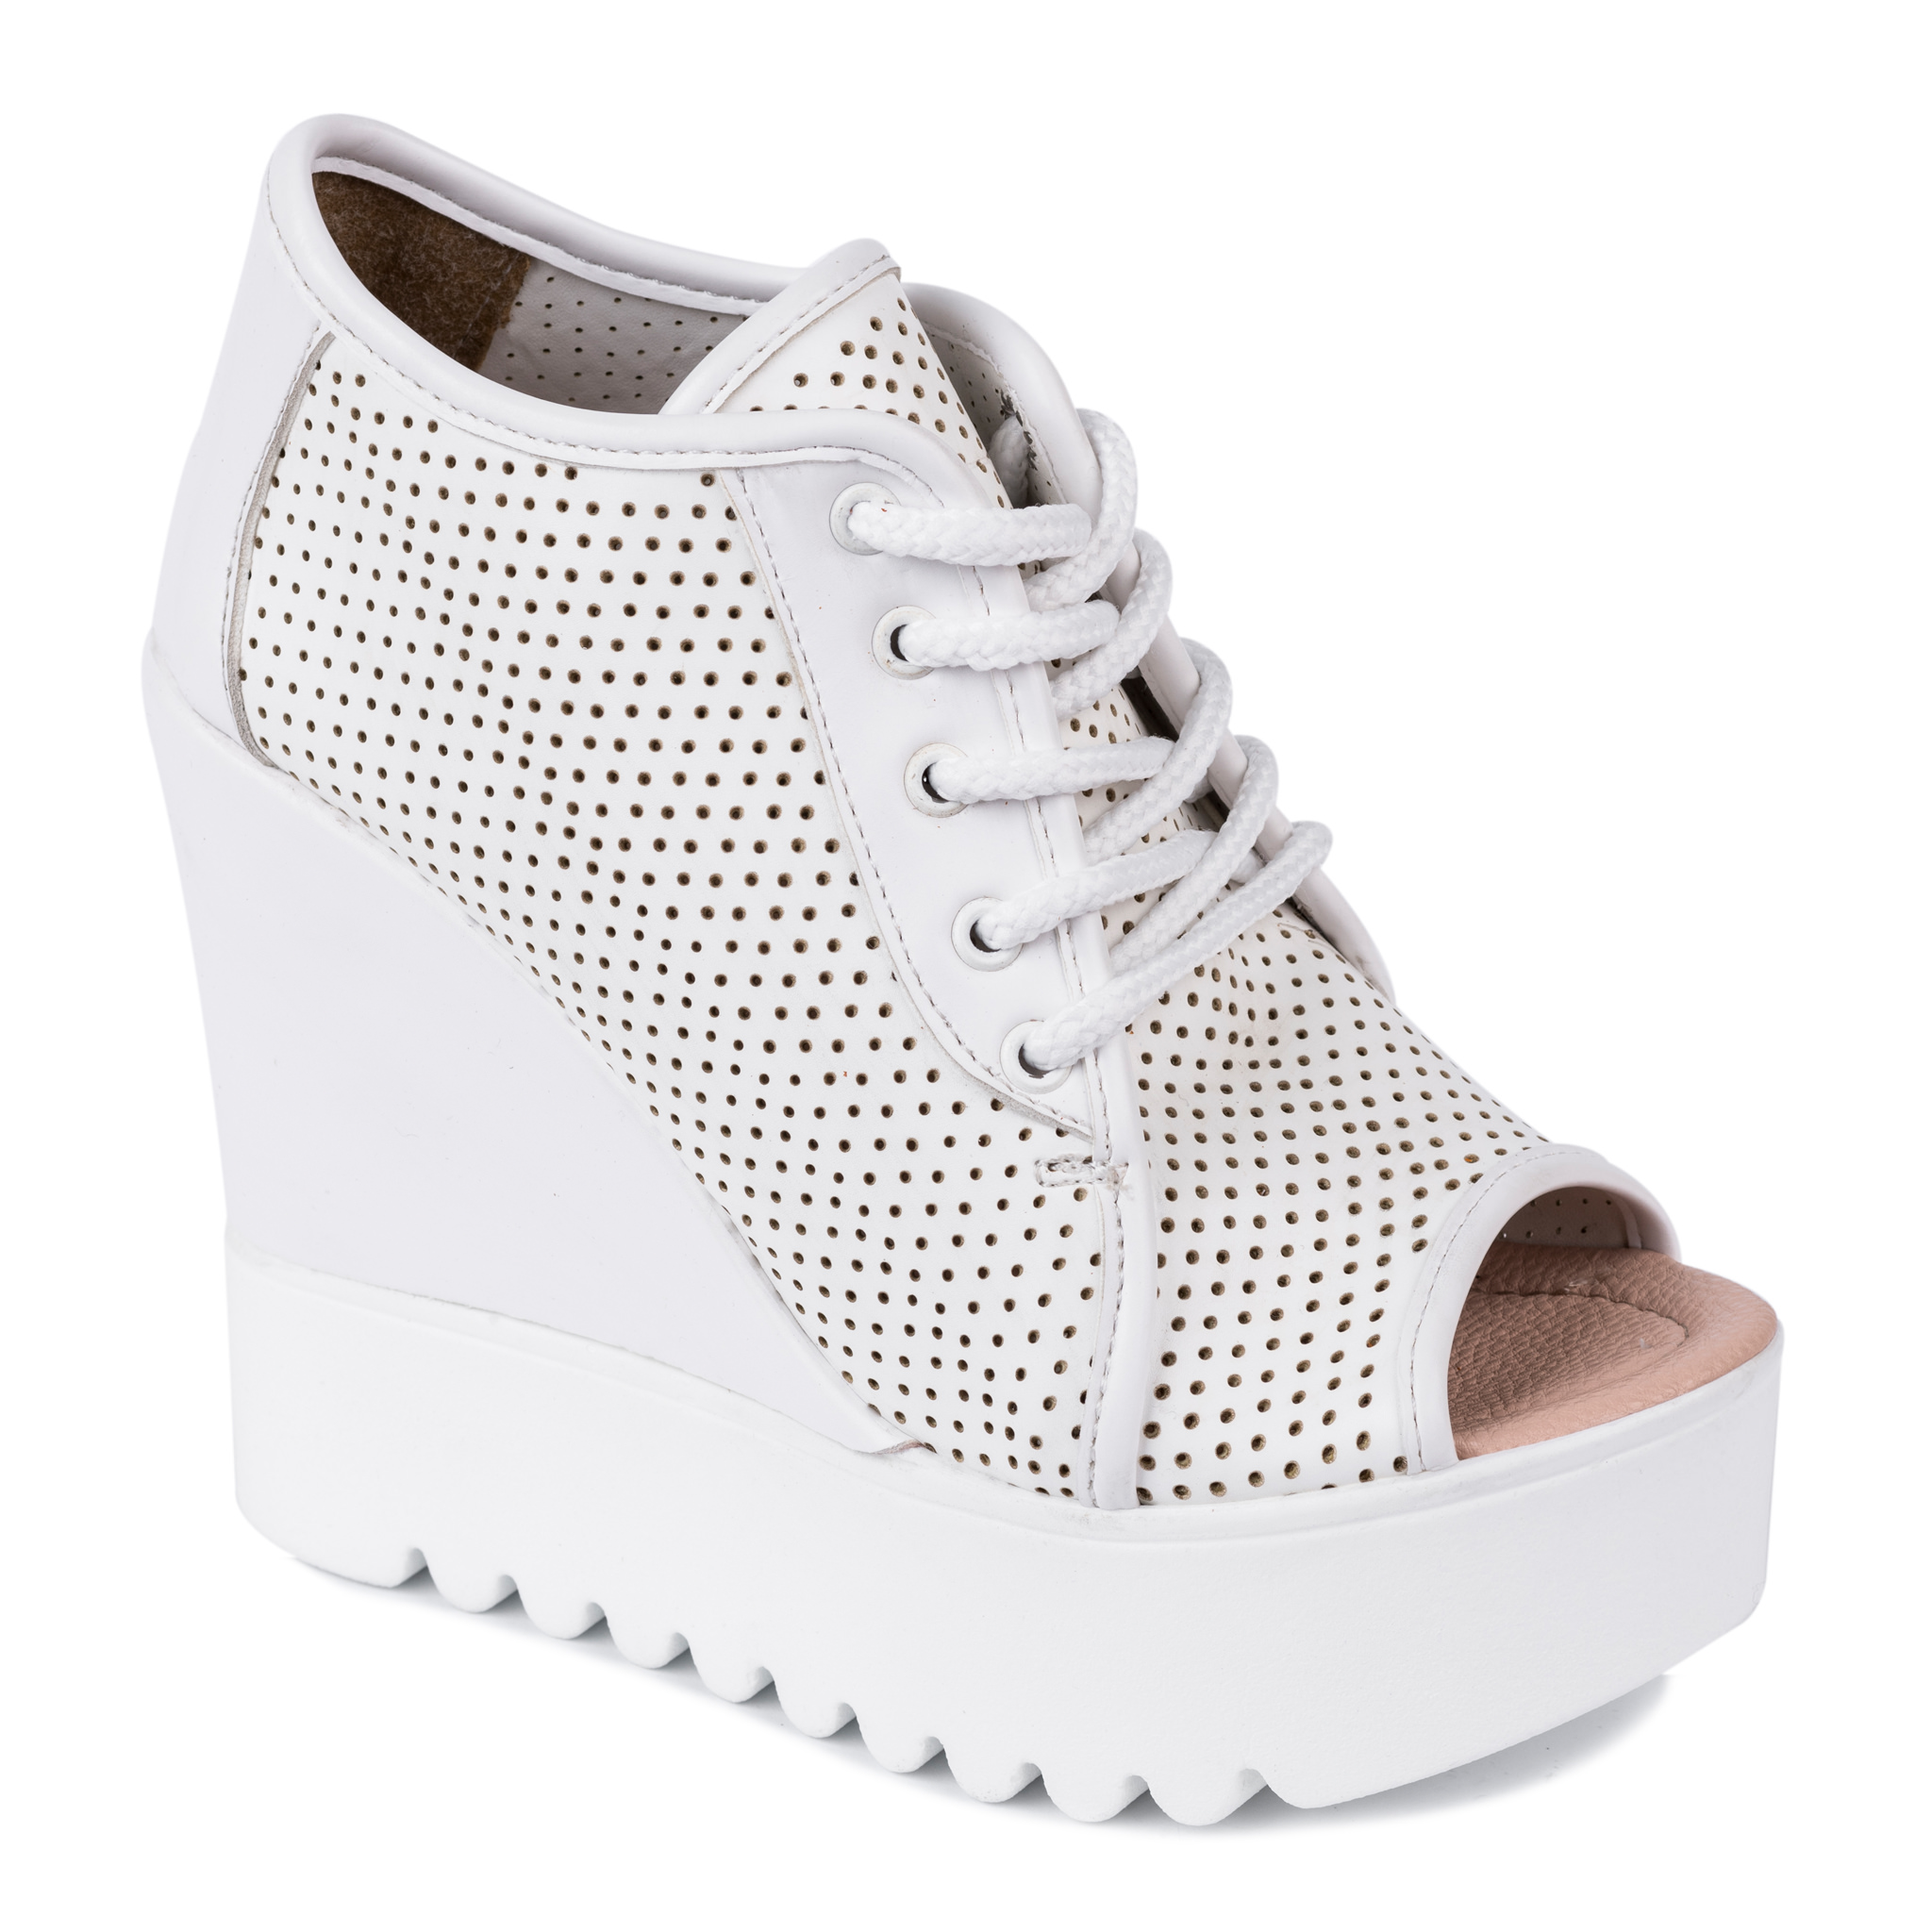 HOLLOW WEDGE SHOES - WHITE